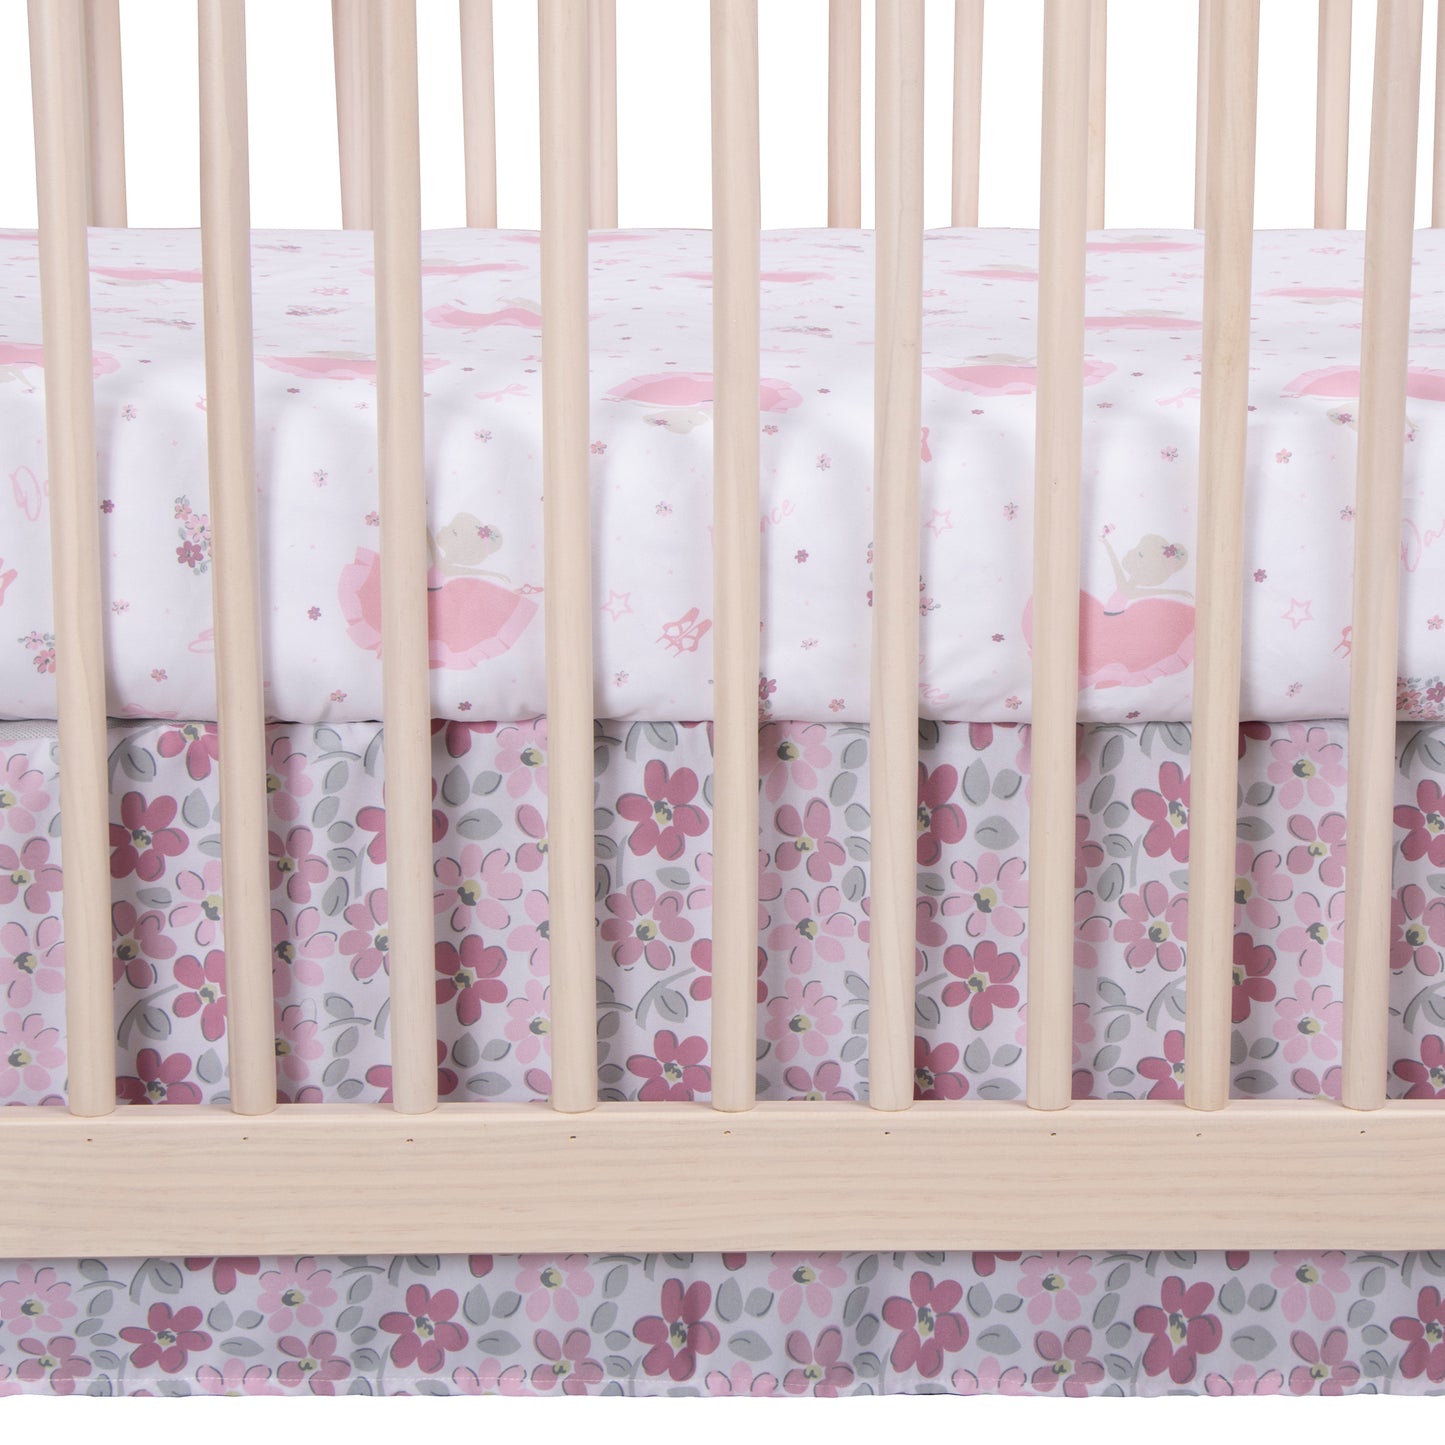  Blooming Ballet 4 Piece Crib Bedding Set - features crib sheet and crib skirt by Sammy and Lou